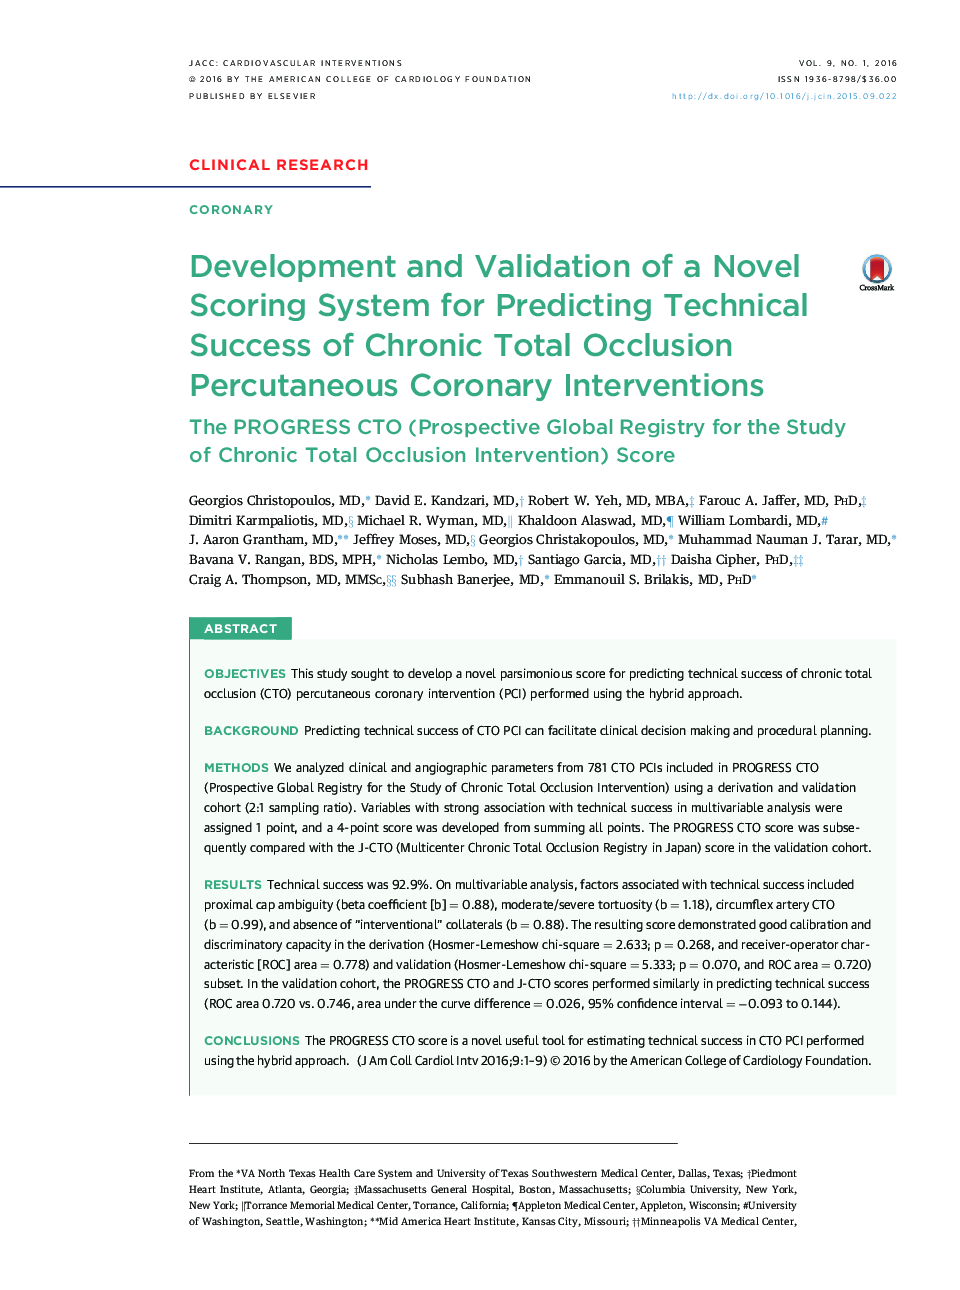 Development and Validation of a Novel Scoring System for Predicting Technical Success of Chronic Total Occlusion Percutaneous Coronary Interventions: The PROGRESS CTO (Prospective Global Registry for the Study of Chronic Total Occlusion Intervention) Scor